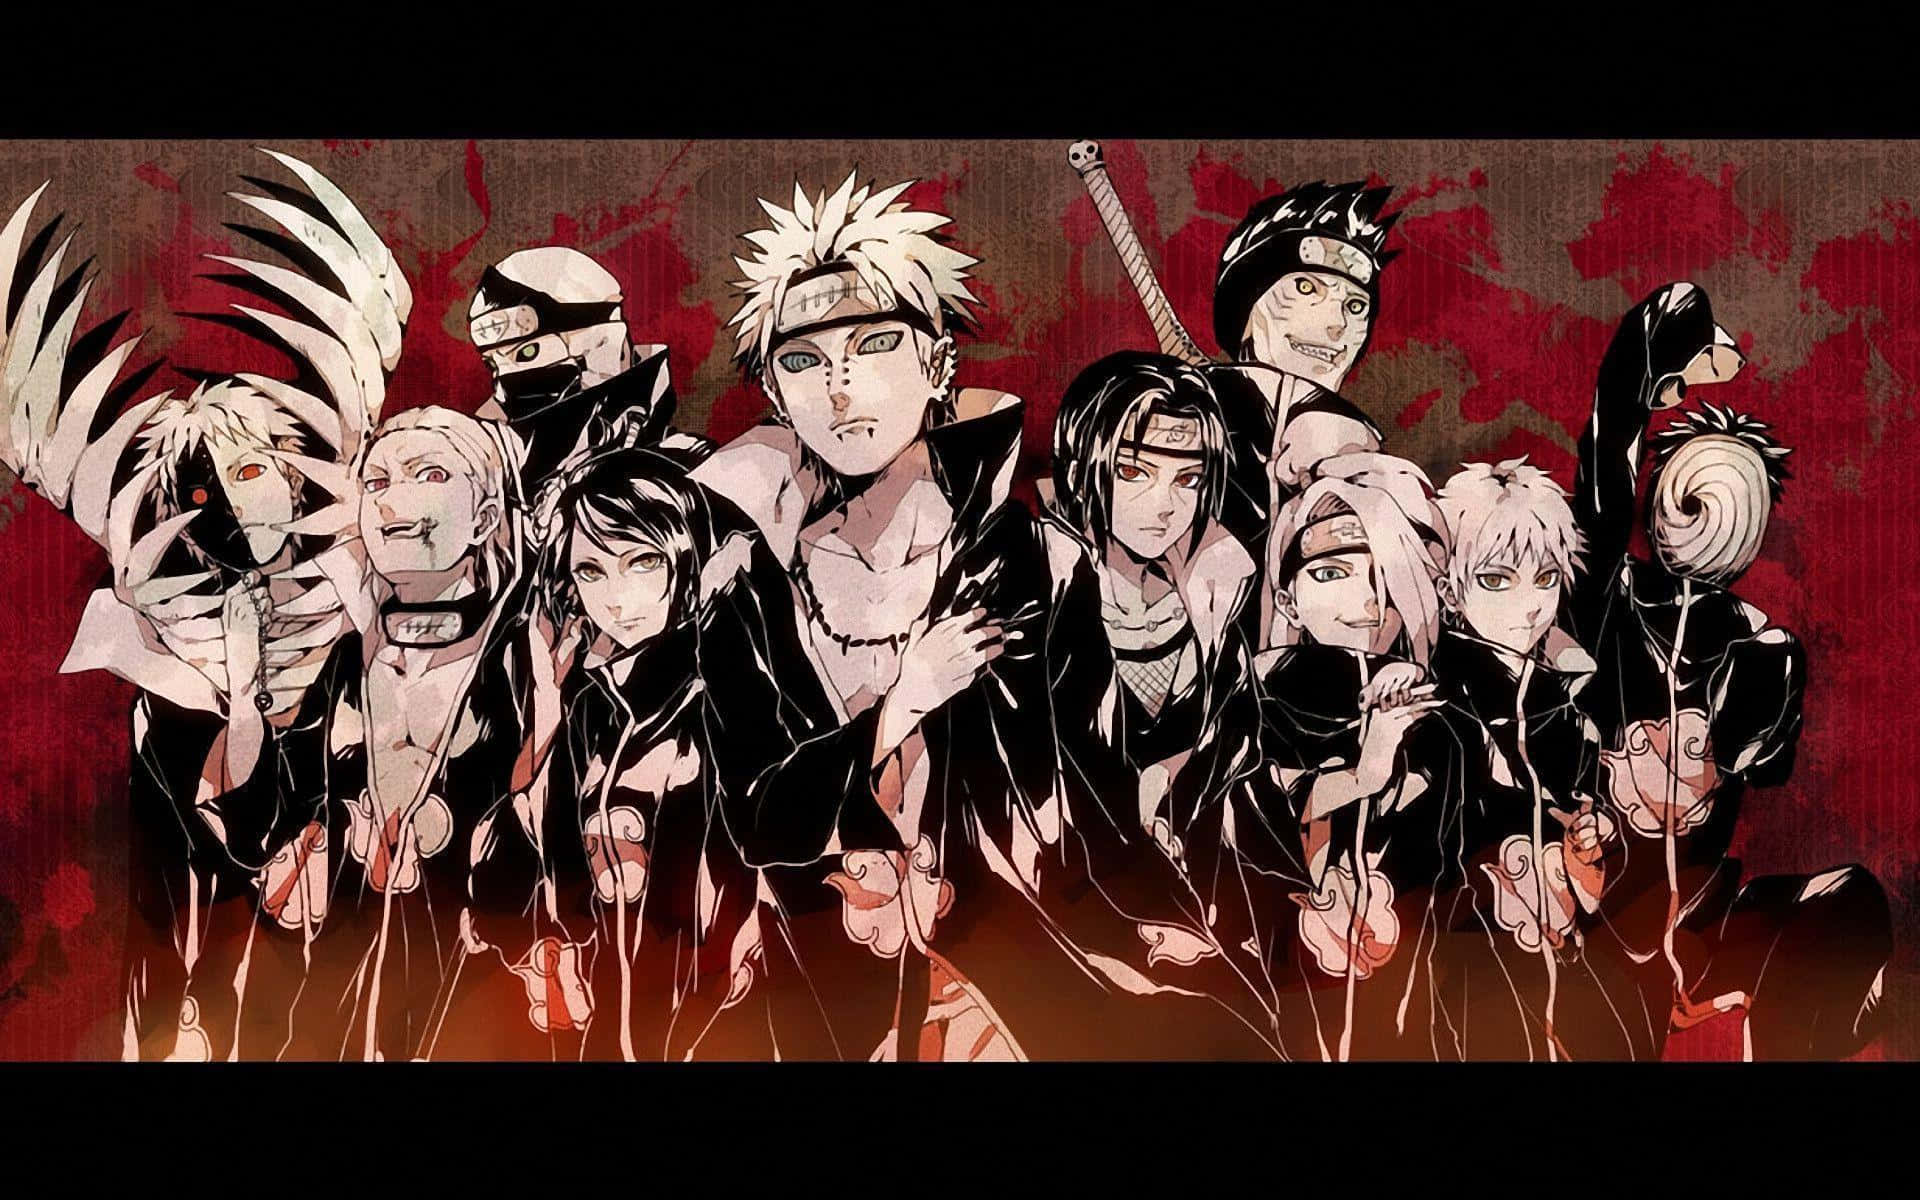 Add a bit of Naruto to your work day with this custom Macbook Pro. Wallpaper